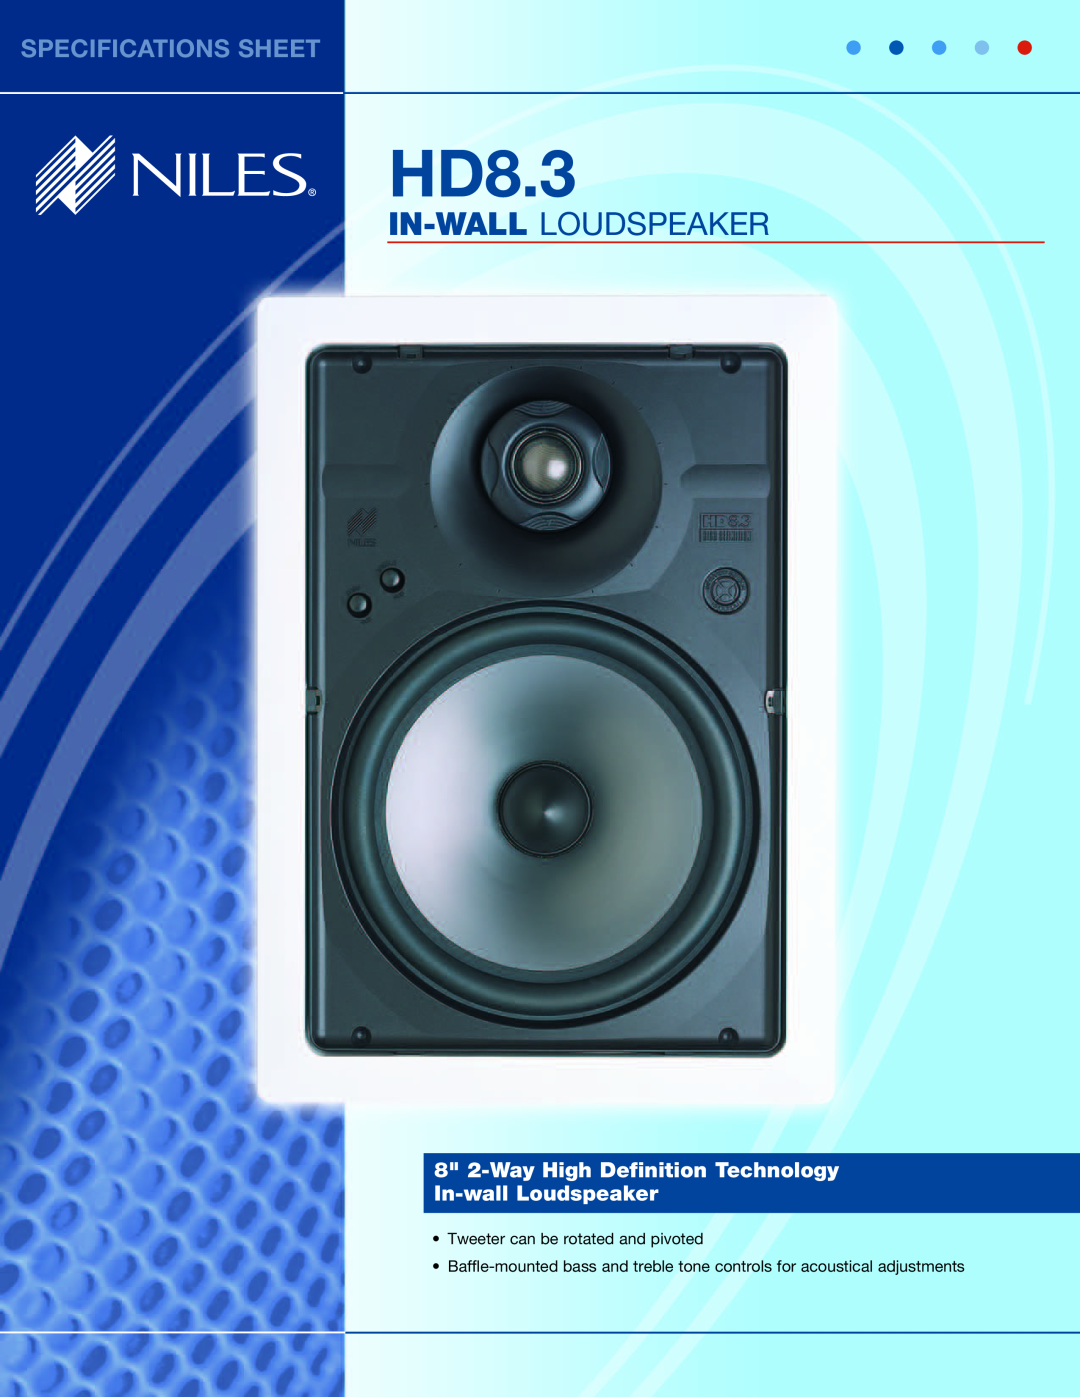 Niles Audio HD8.3 specifications In-Wall Loudspeaker, Specifications Sheet, 8 2-WayHigh Definition Technology 